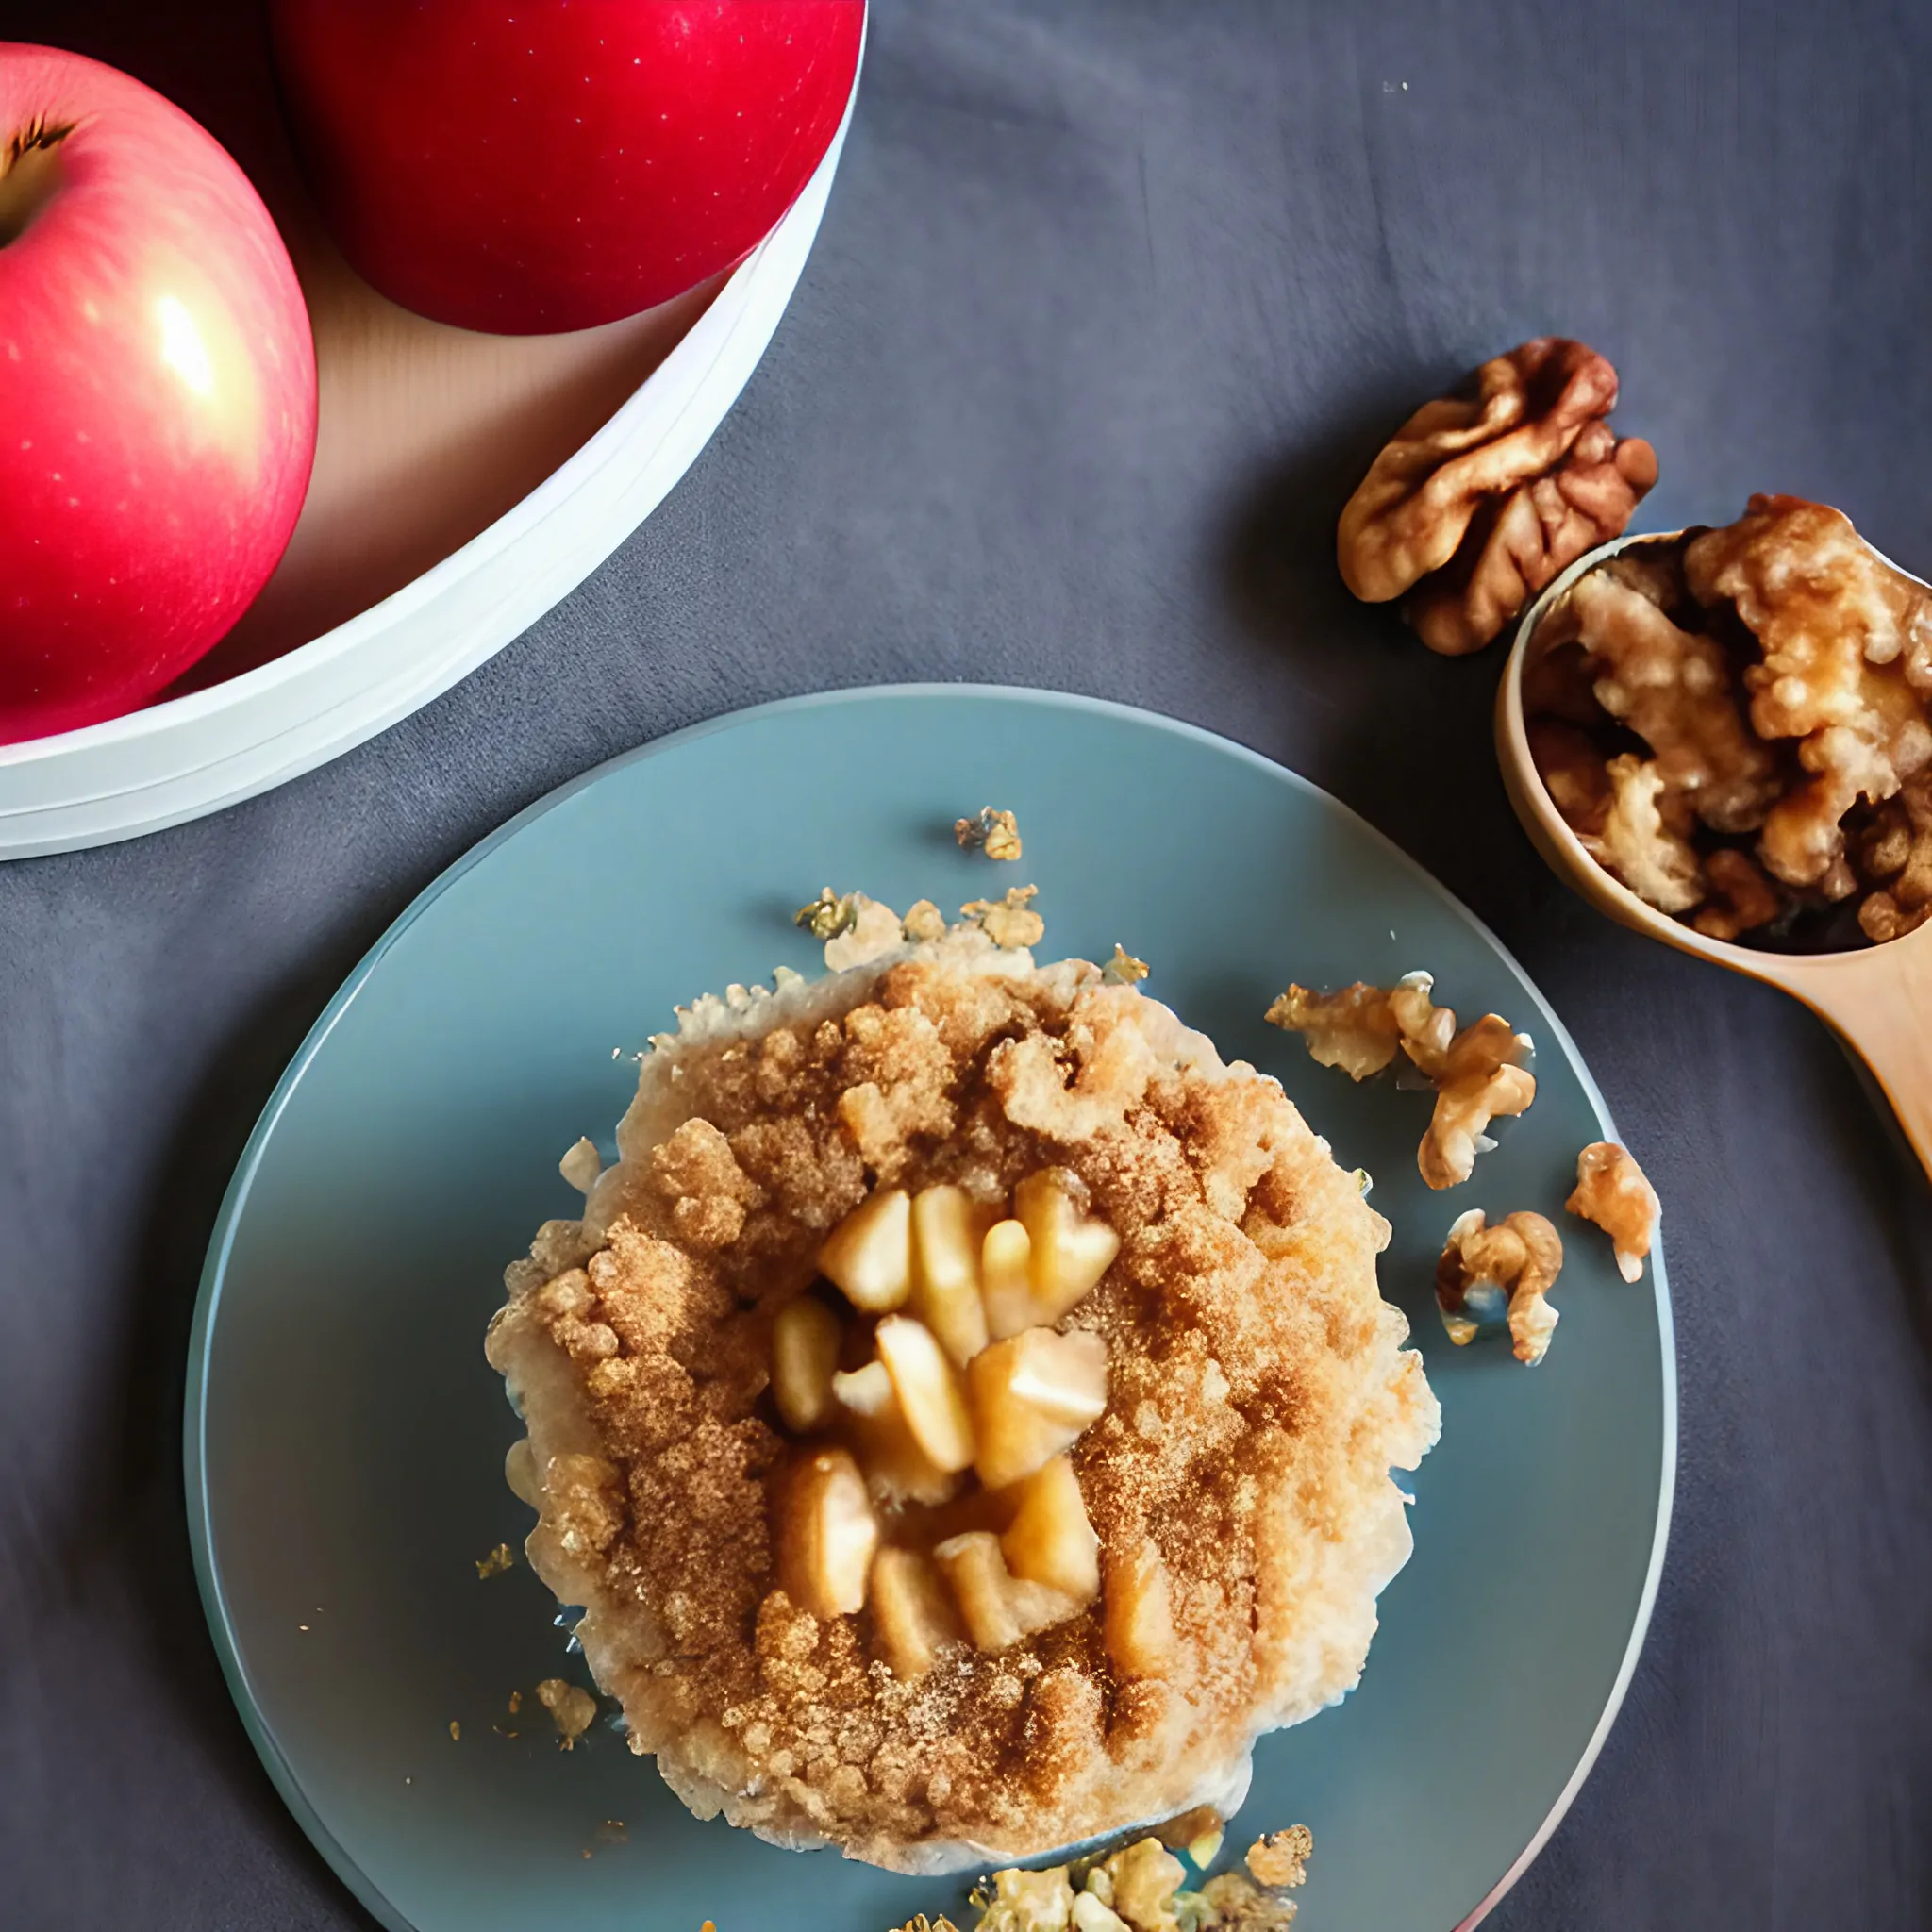 How To Bake Grandma Style Apple Crumble With Oats – Spicyum